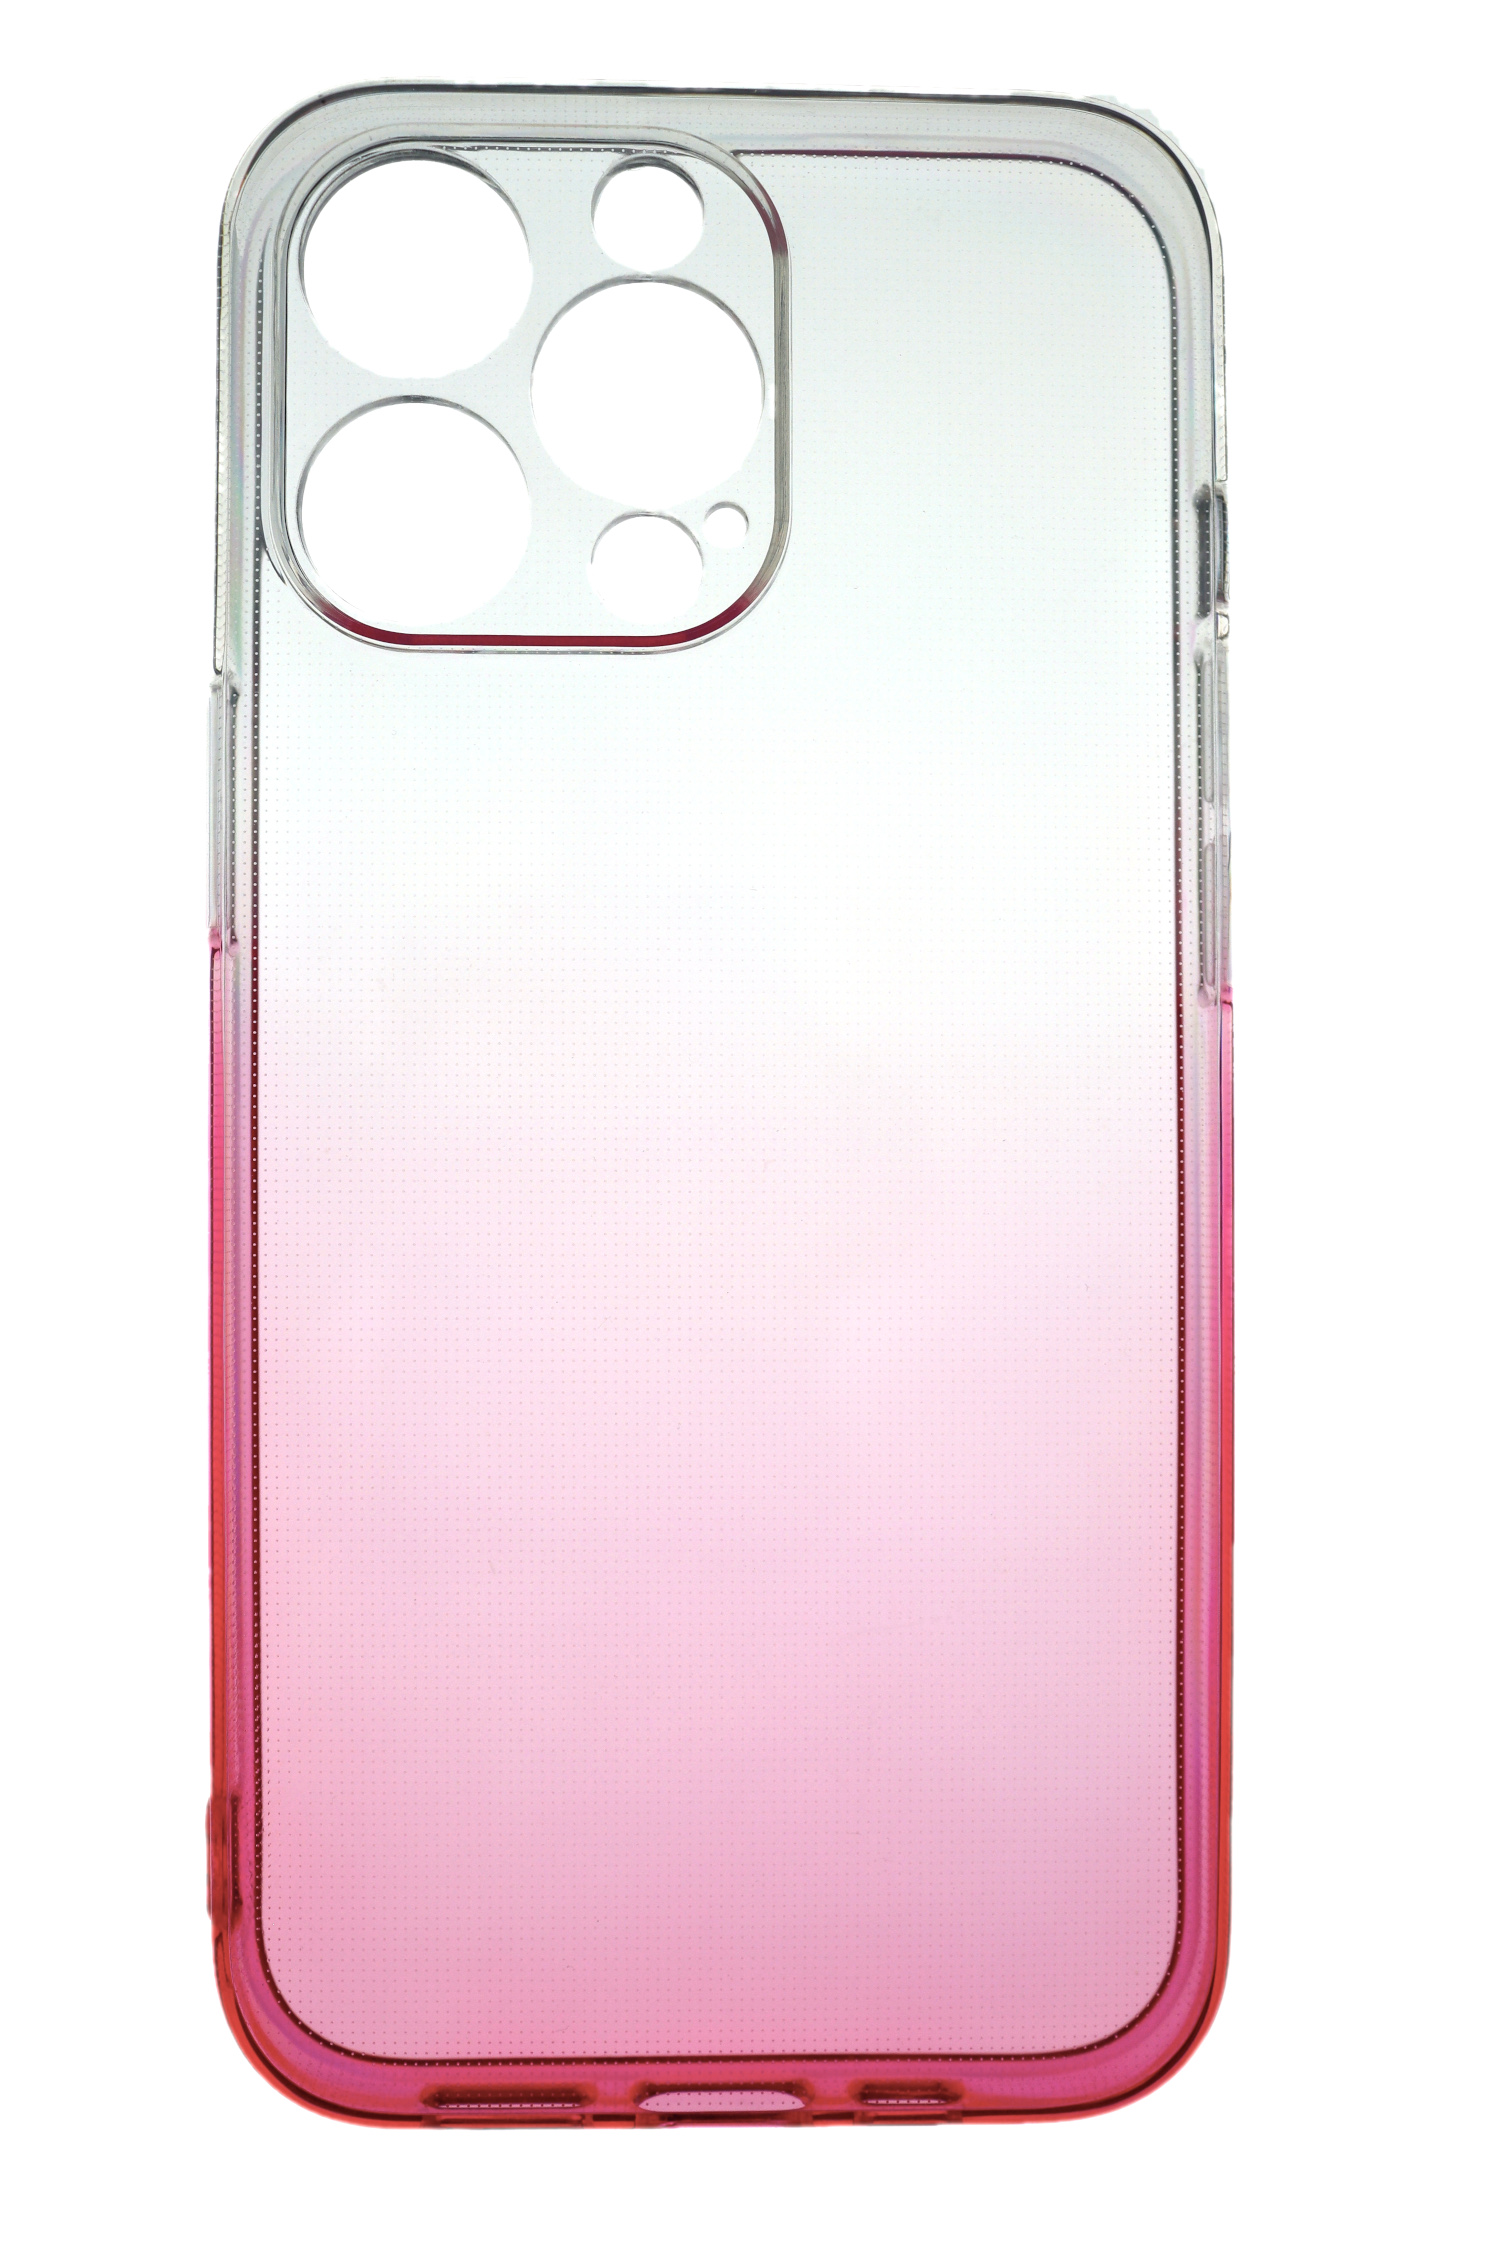 mm 14 Pink, Case TPU iPhone Backcover, Strong, 2.0 JAMCOVER Transparent Apple, Pro,